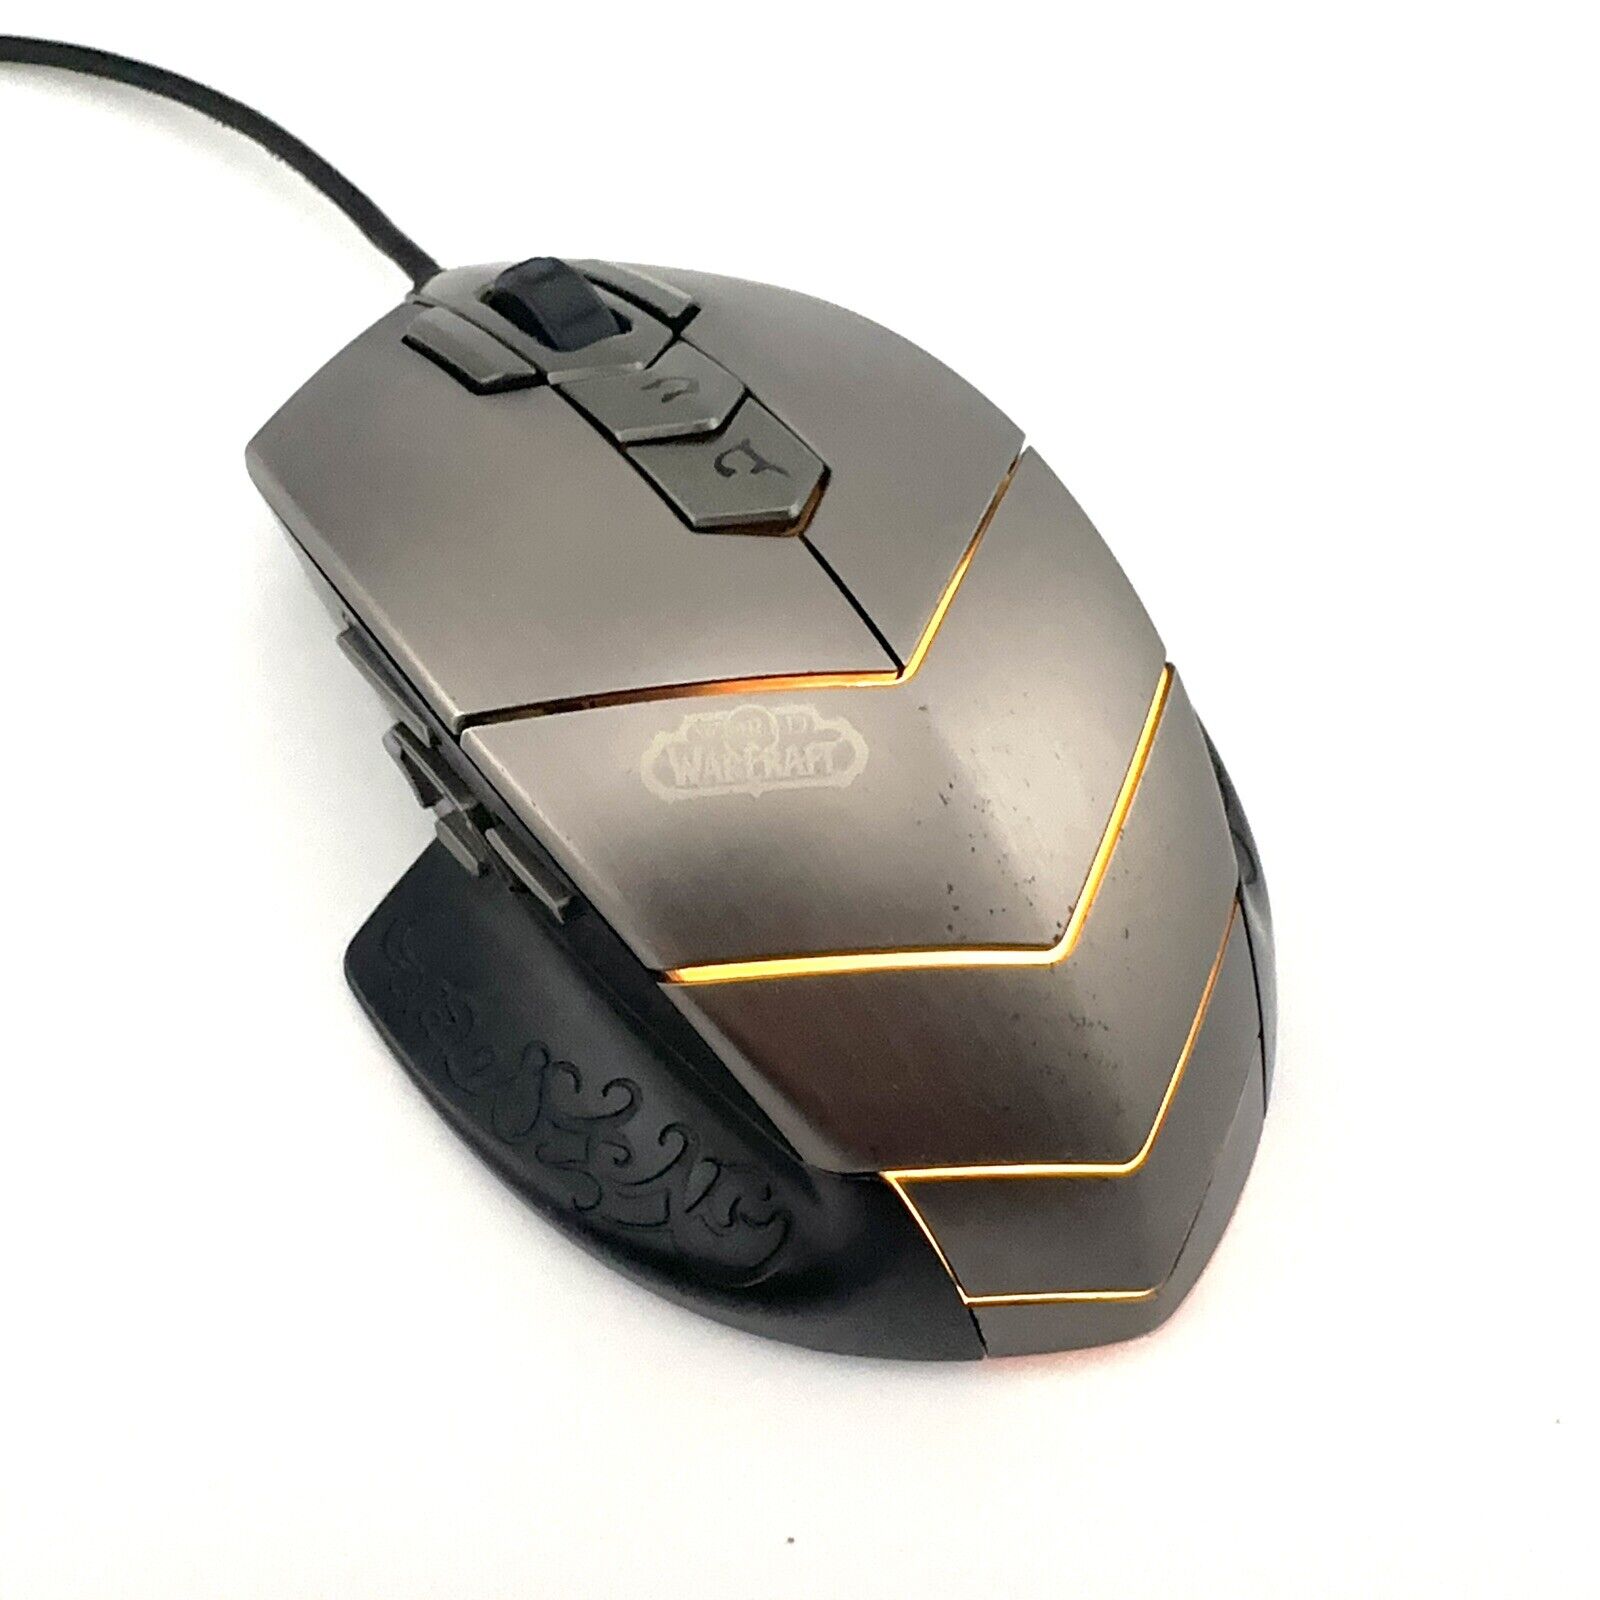 SteelSeries World of Warcraft MMO WOW Gaming Mouse